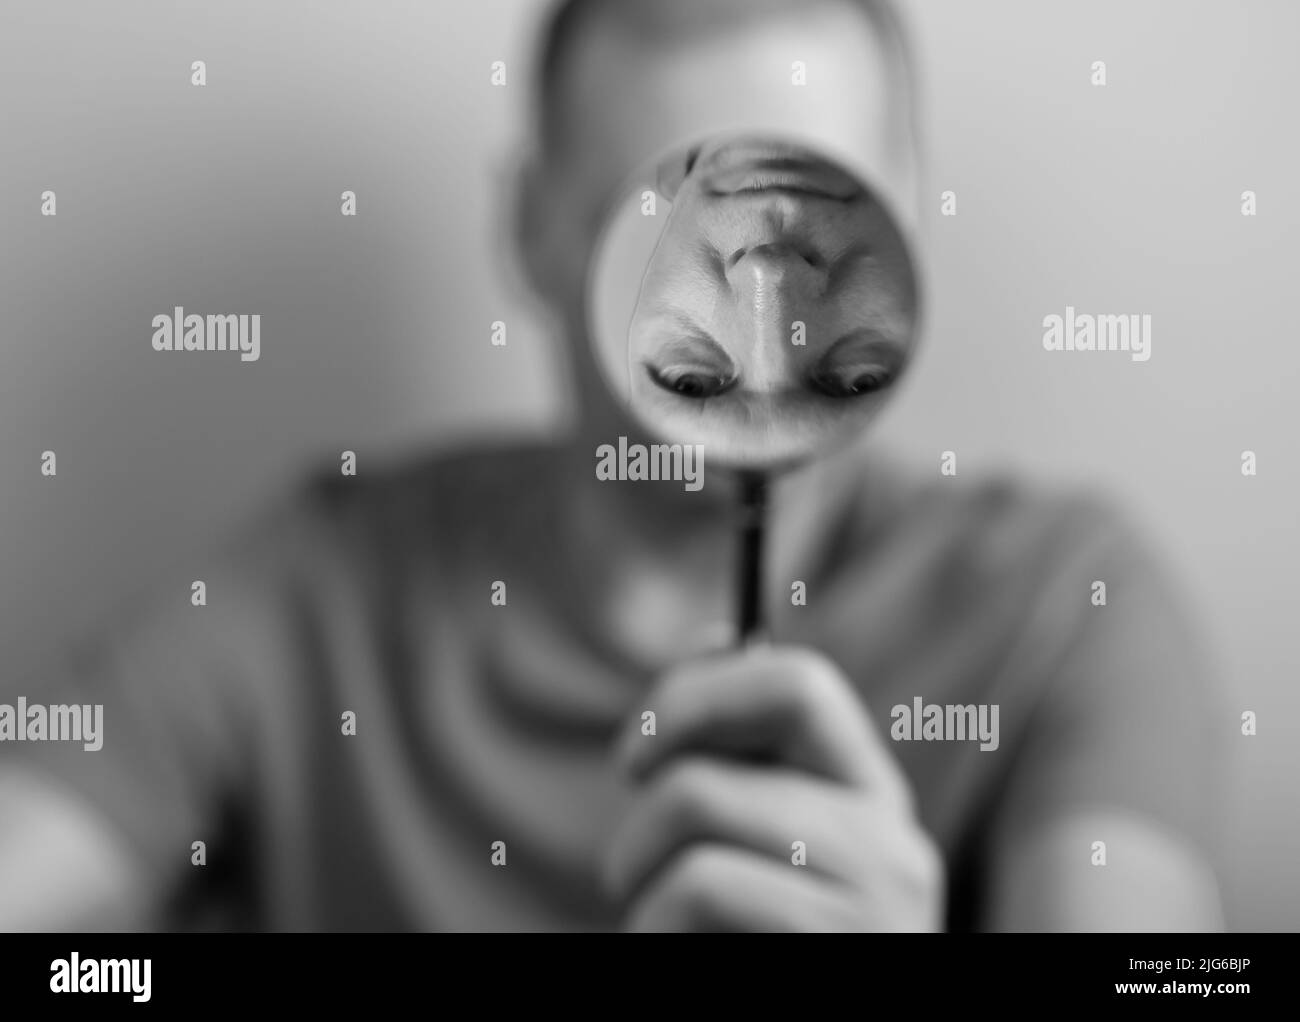 Psychology concept of distorted self perception. Man with magnifying glass and upside down fake reflection. High quality photo Stock Photo